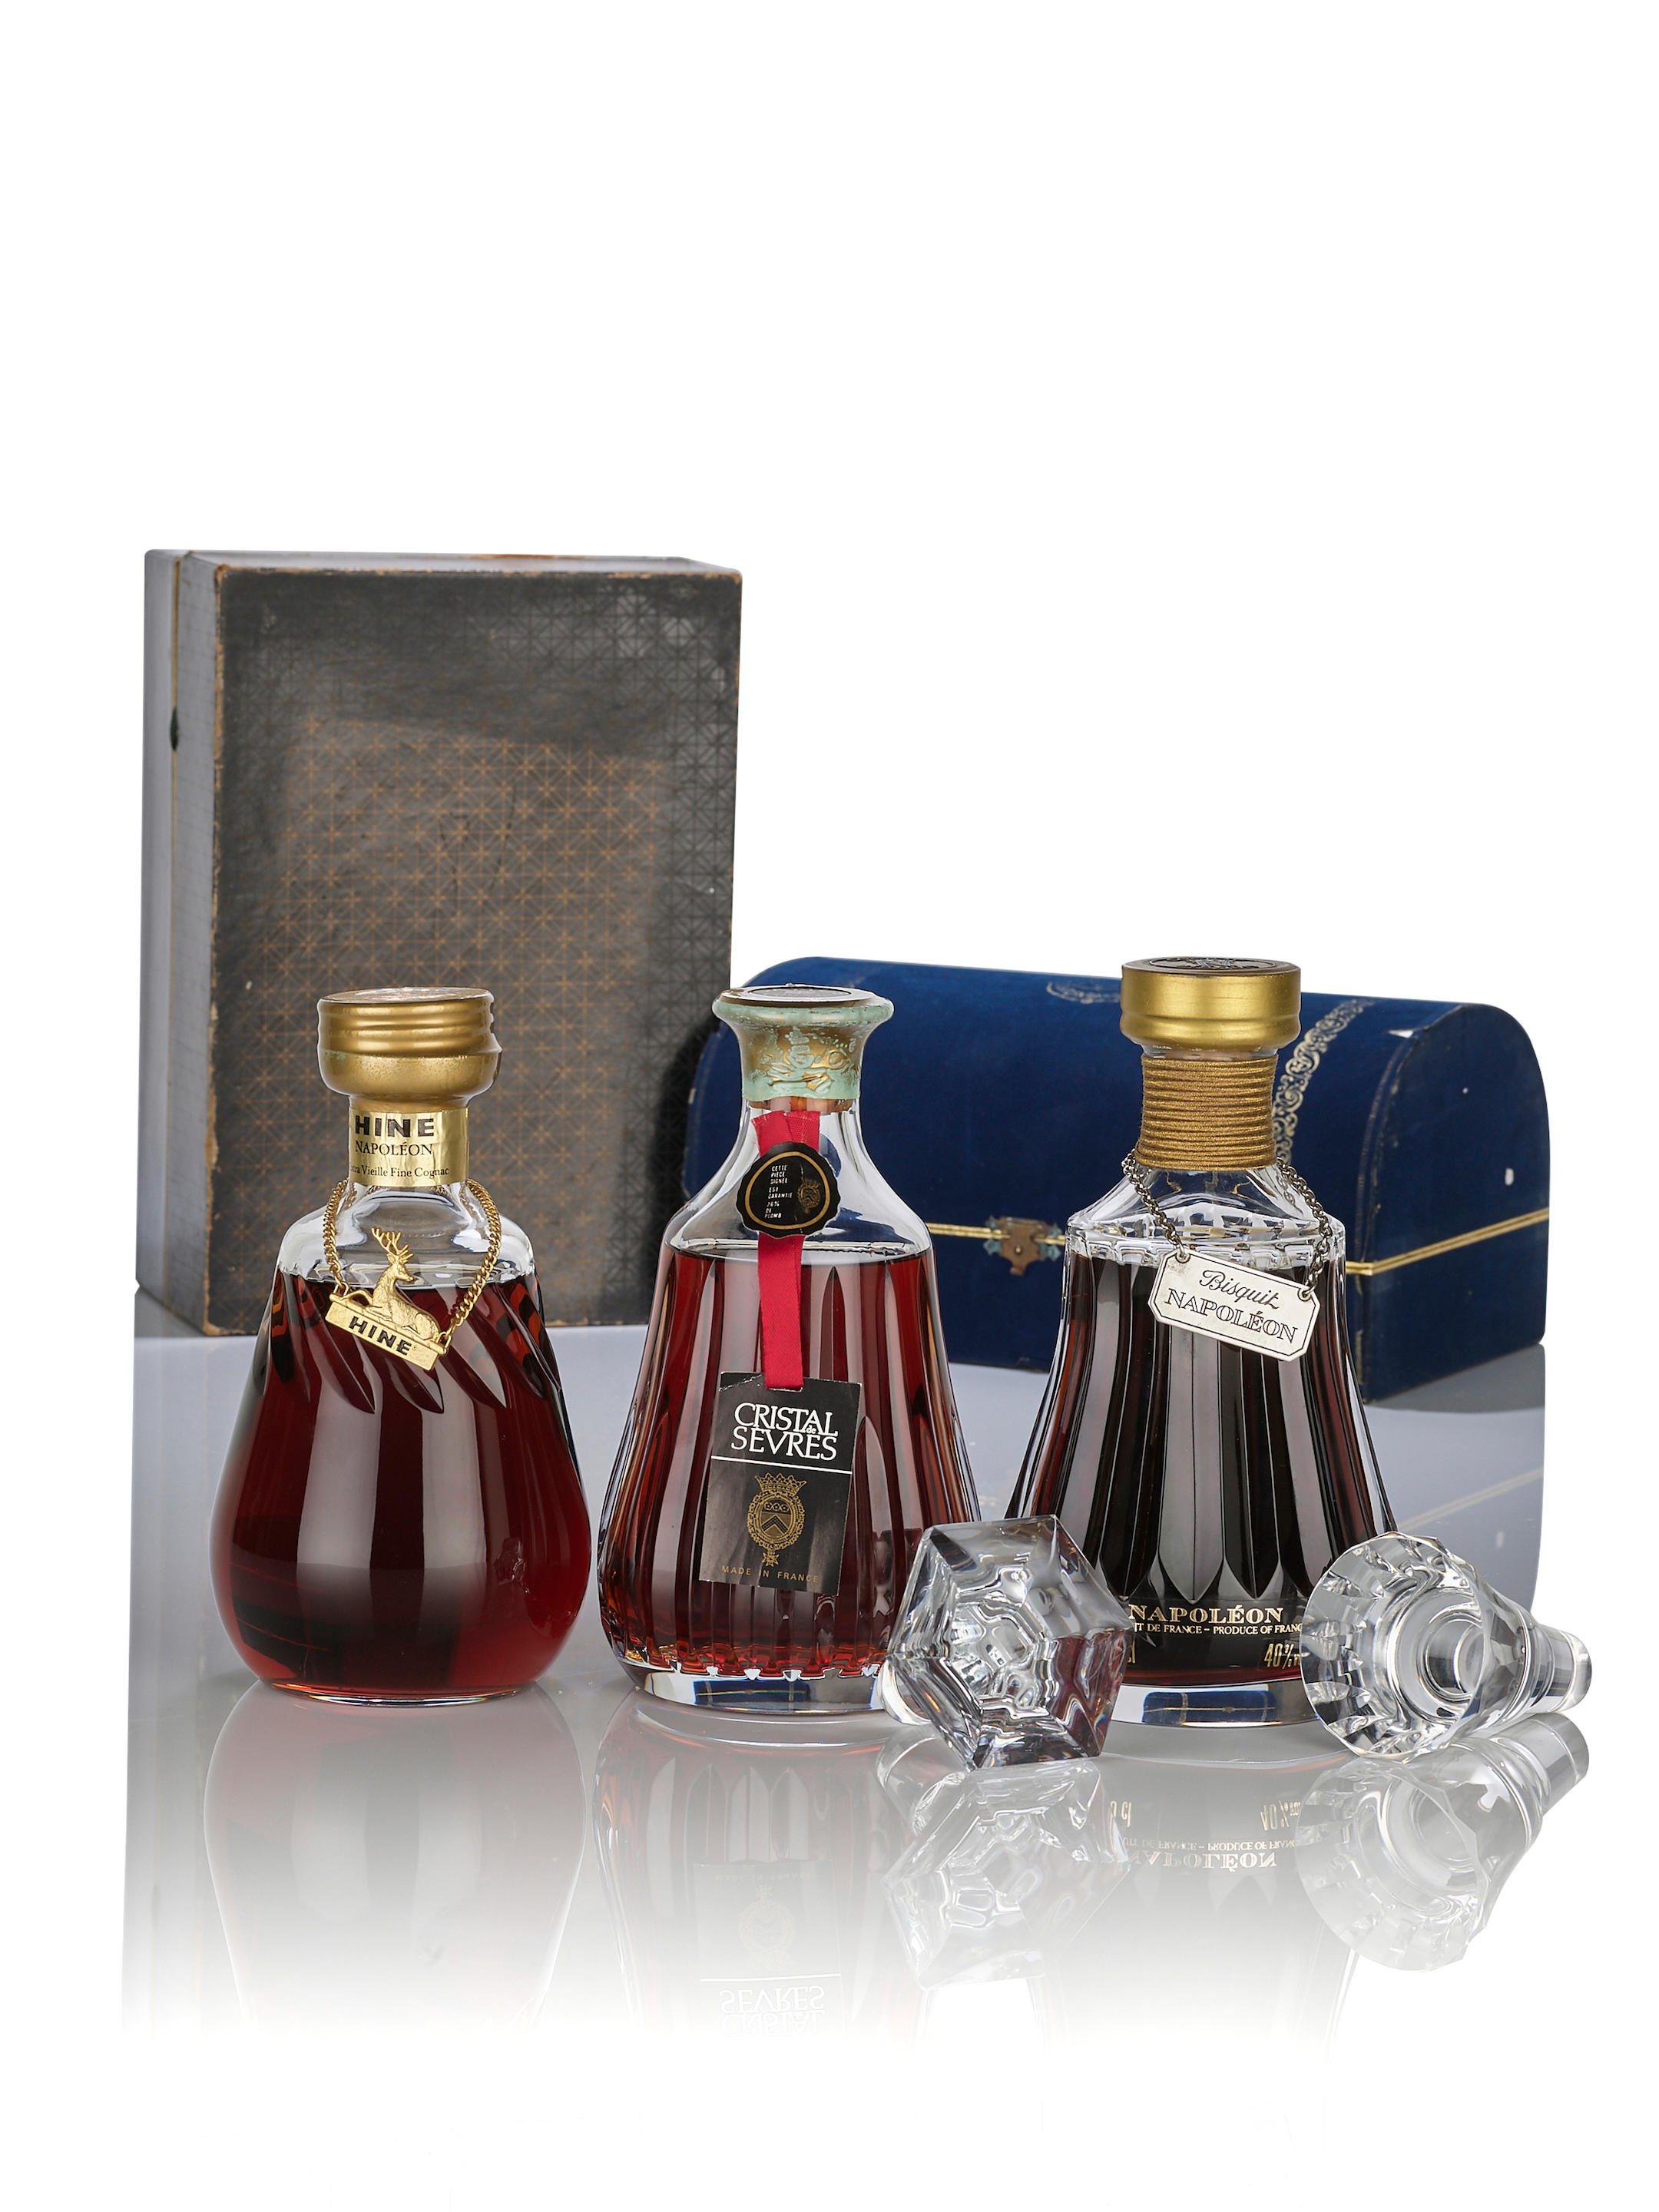 Lot - 1 bouteille COGNAC, The brandy of Napoleon, Extra Vieille